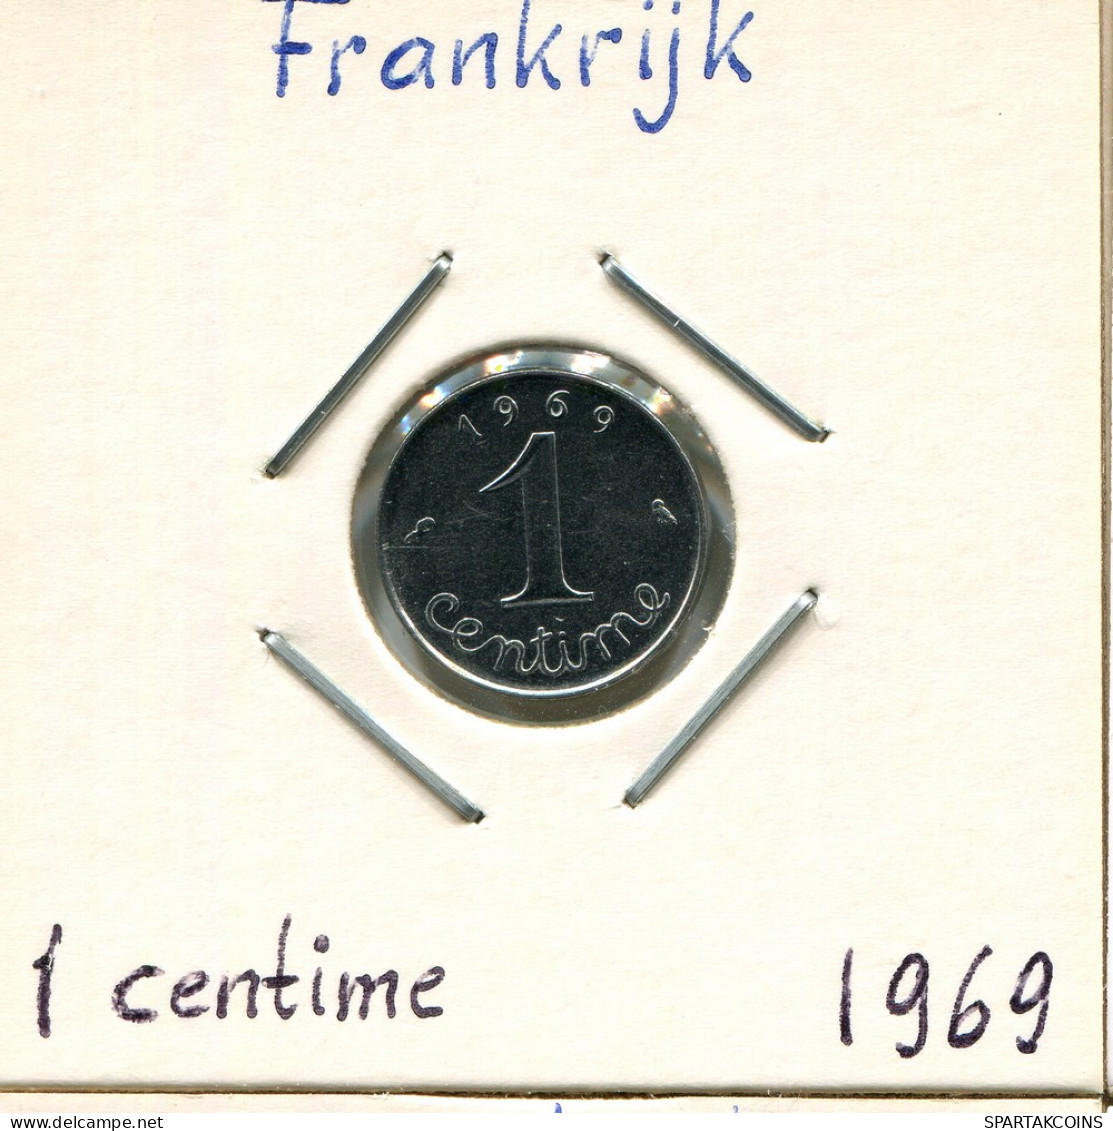 1 CENTIME 1969 FRANCE Coin French Coin #AK973 - 1 Centime